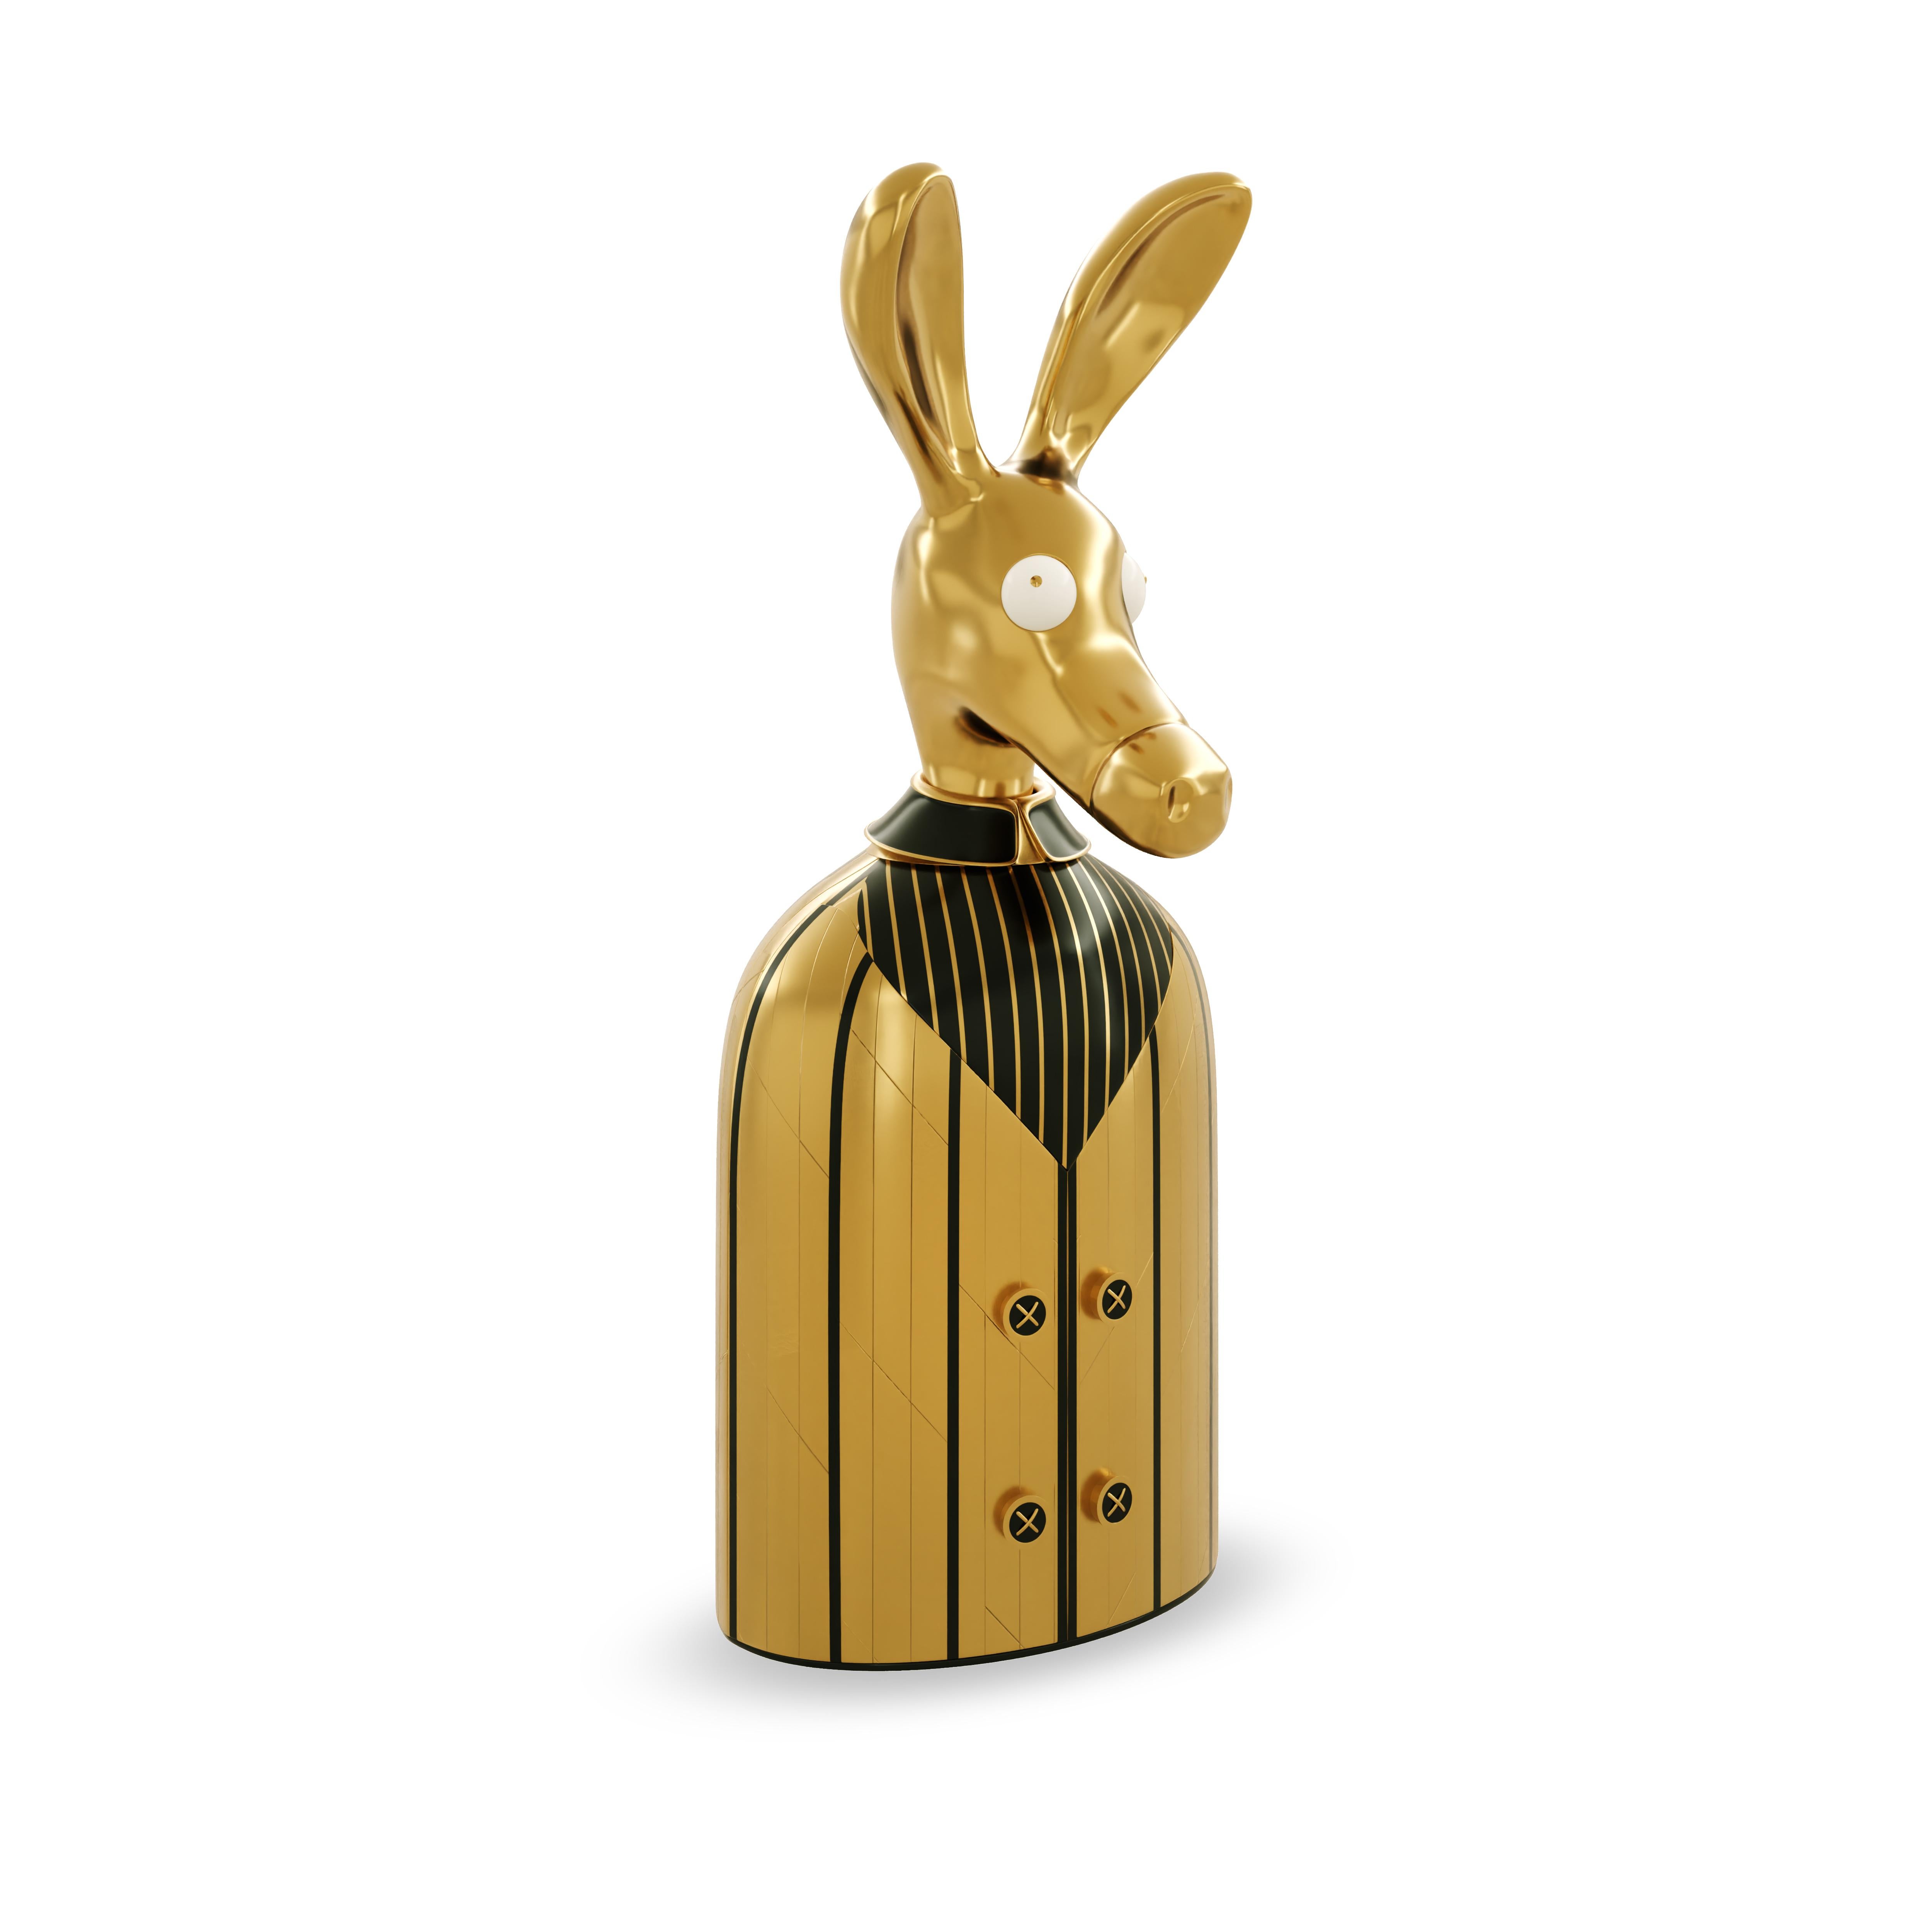 The Ciuco Black donkey bar storage cabinet with brass inlay by Matteo Cibic has a brass donkey head that sits atop a black resin lined brass shirt. The buttons are knobs to open the door, revealing a spacious cabinet within The cabinet has two doors